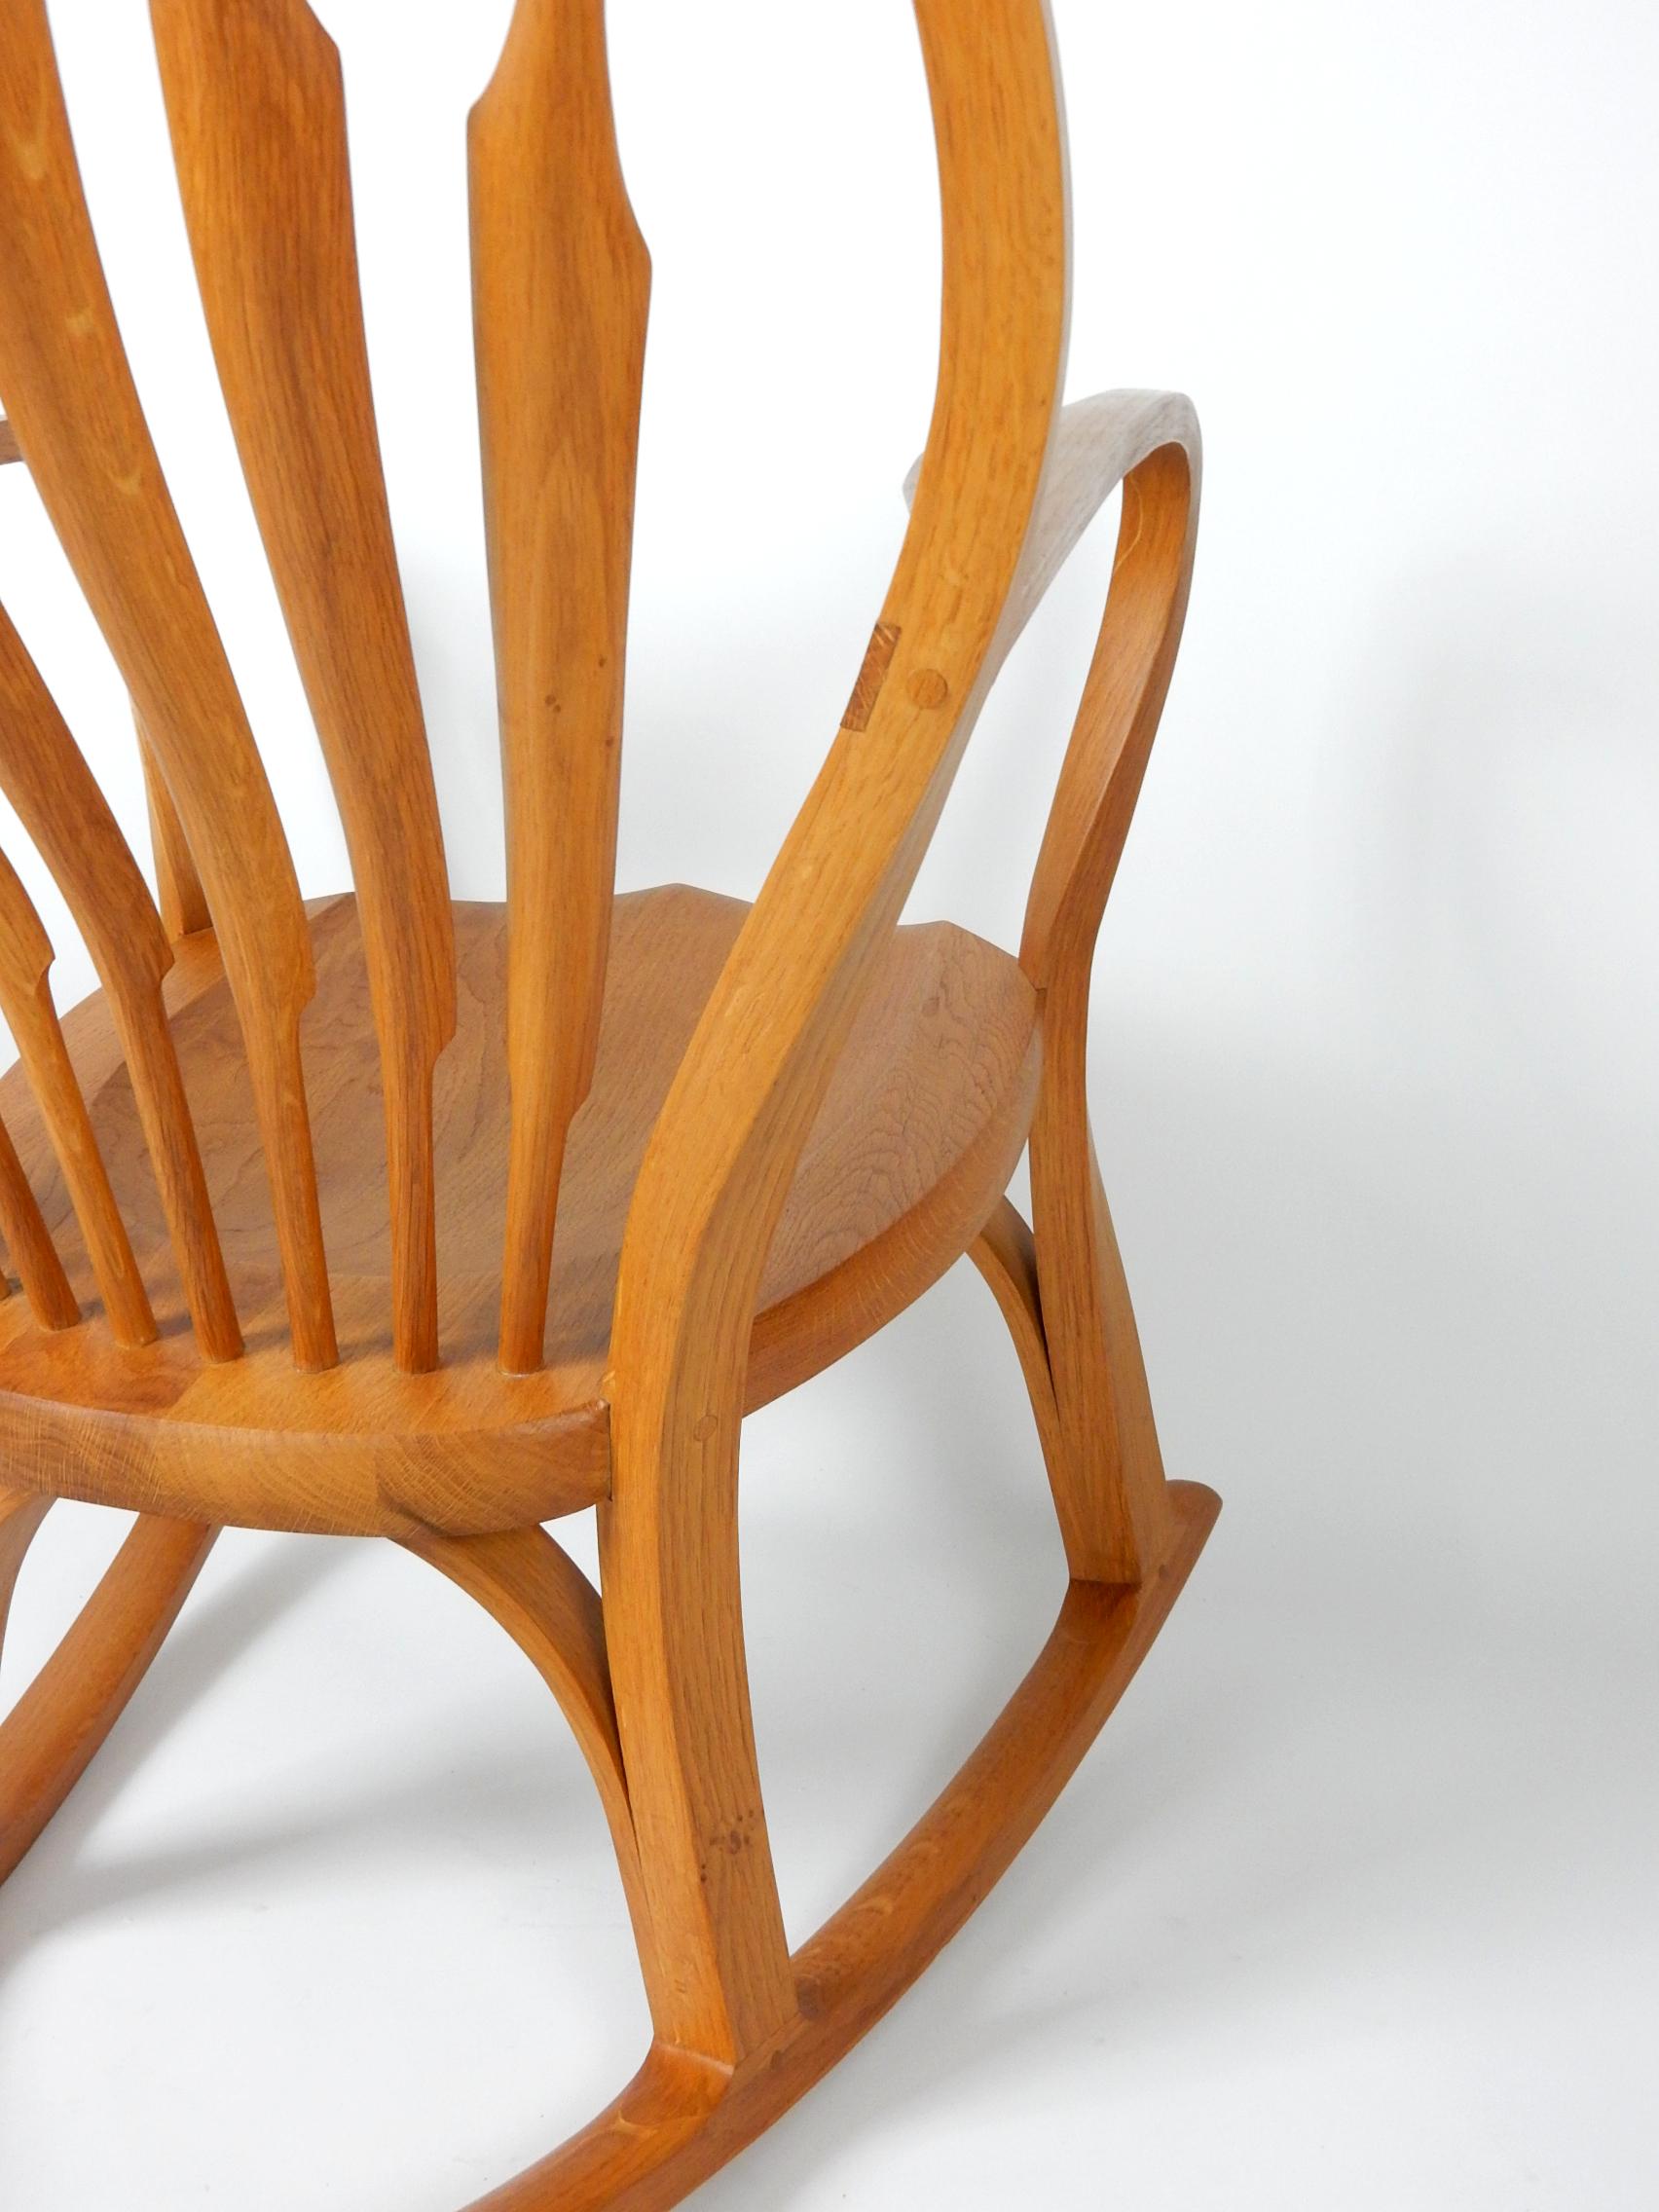 Hand-Crafted Mid-Century Modern Sculptural Bentwood Rocking Art Chair For Sale